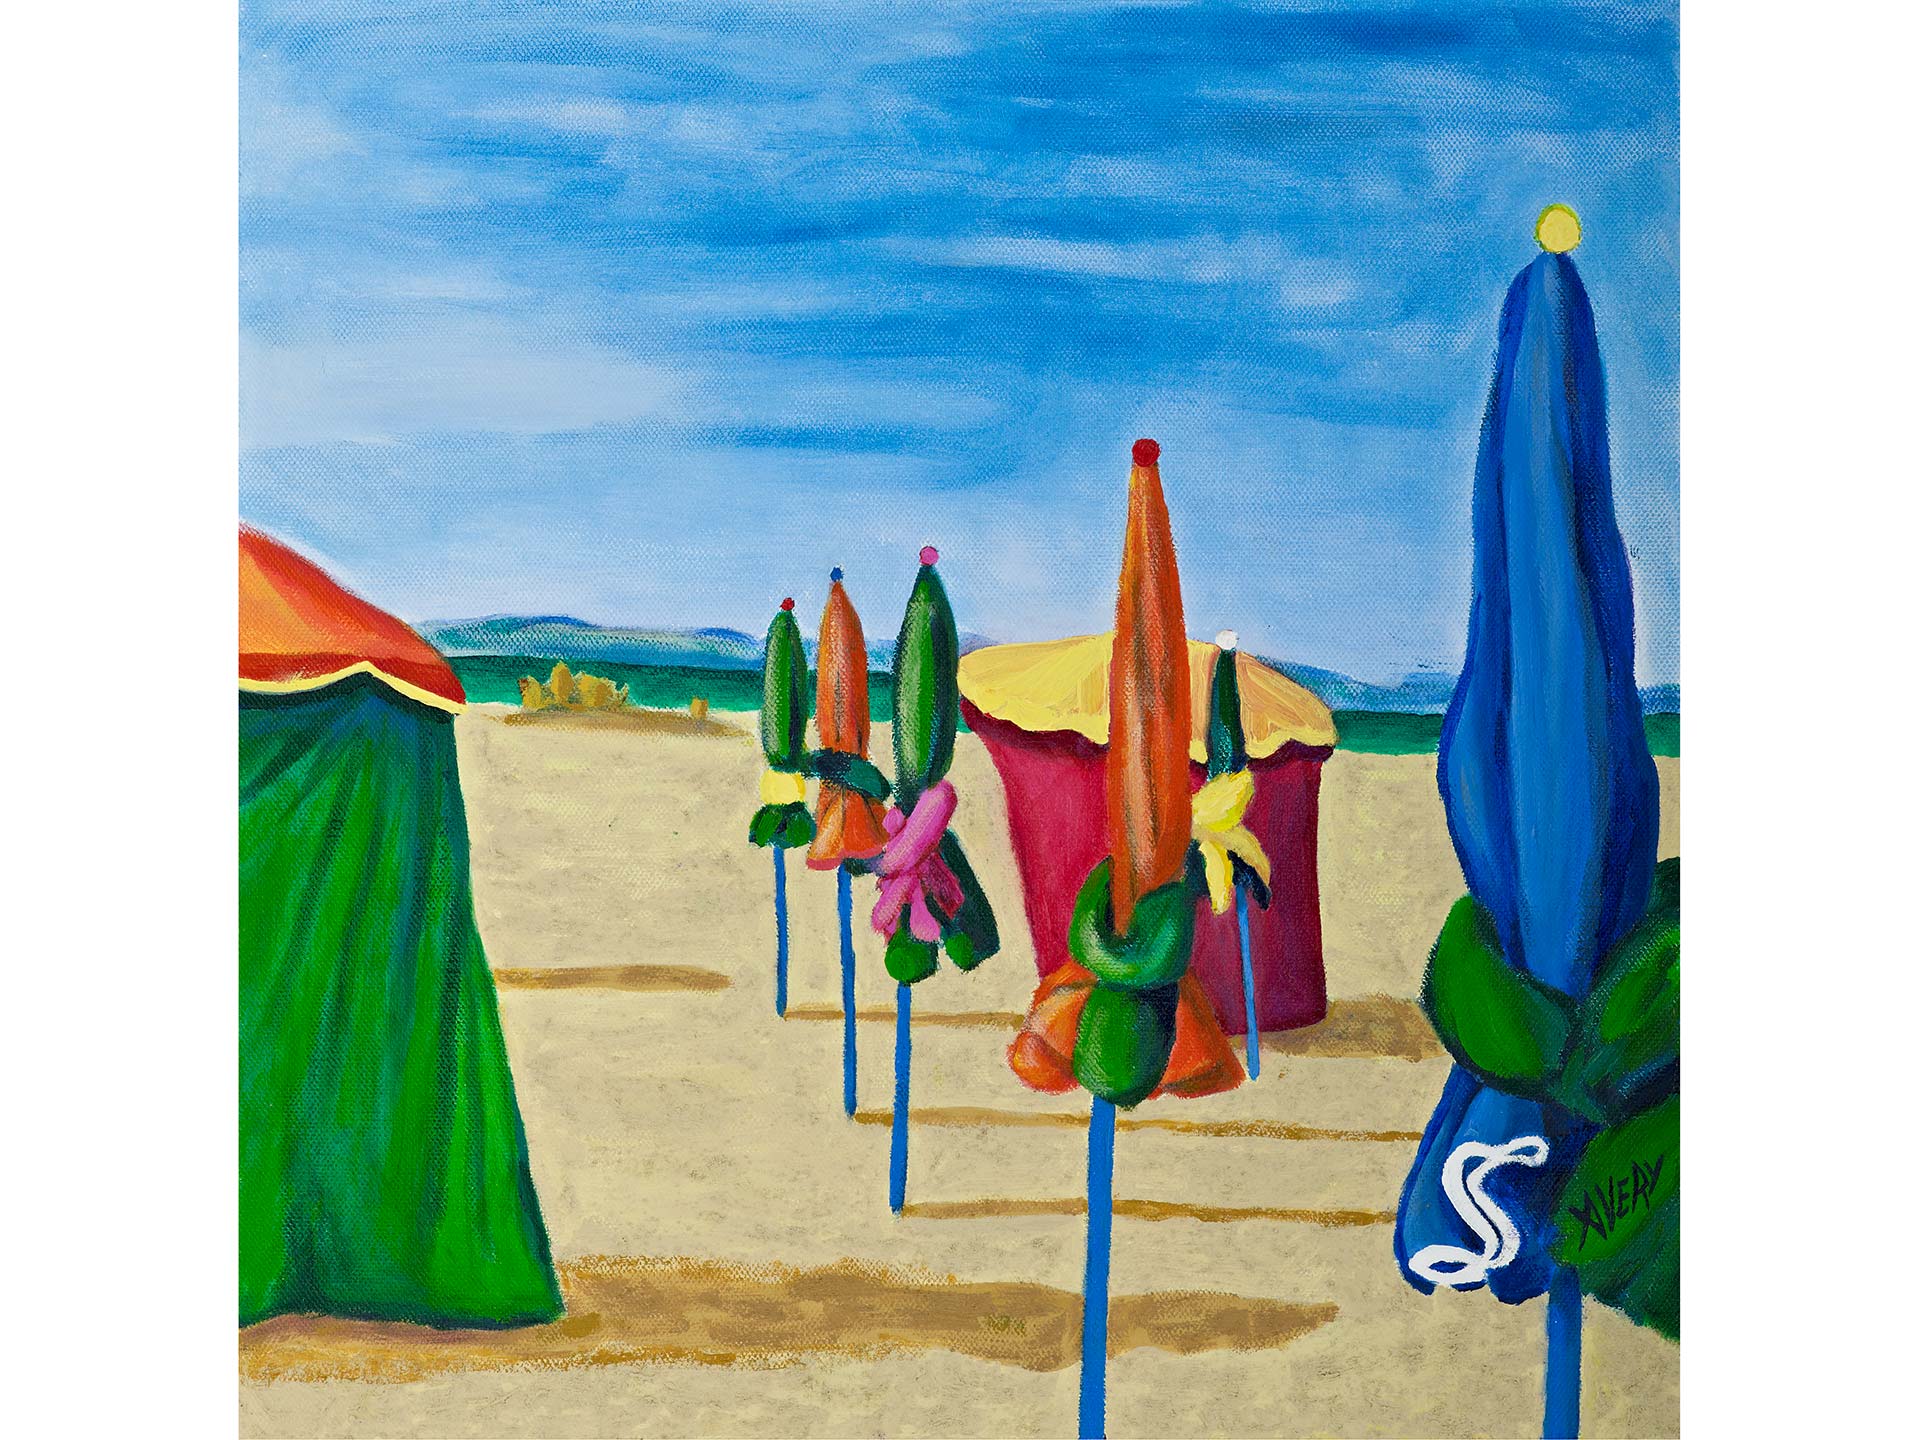 Lauren Avery Hutton | Deauville 4, oil and sand, 16x16, 2012